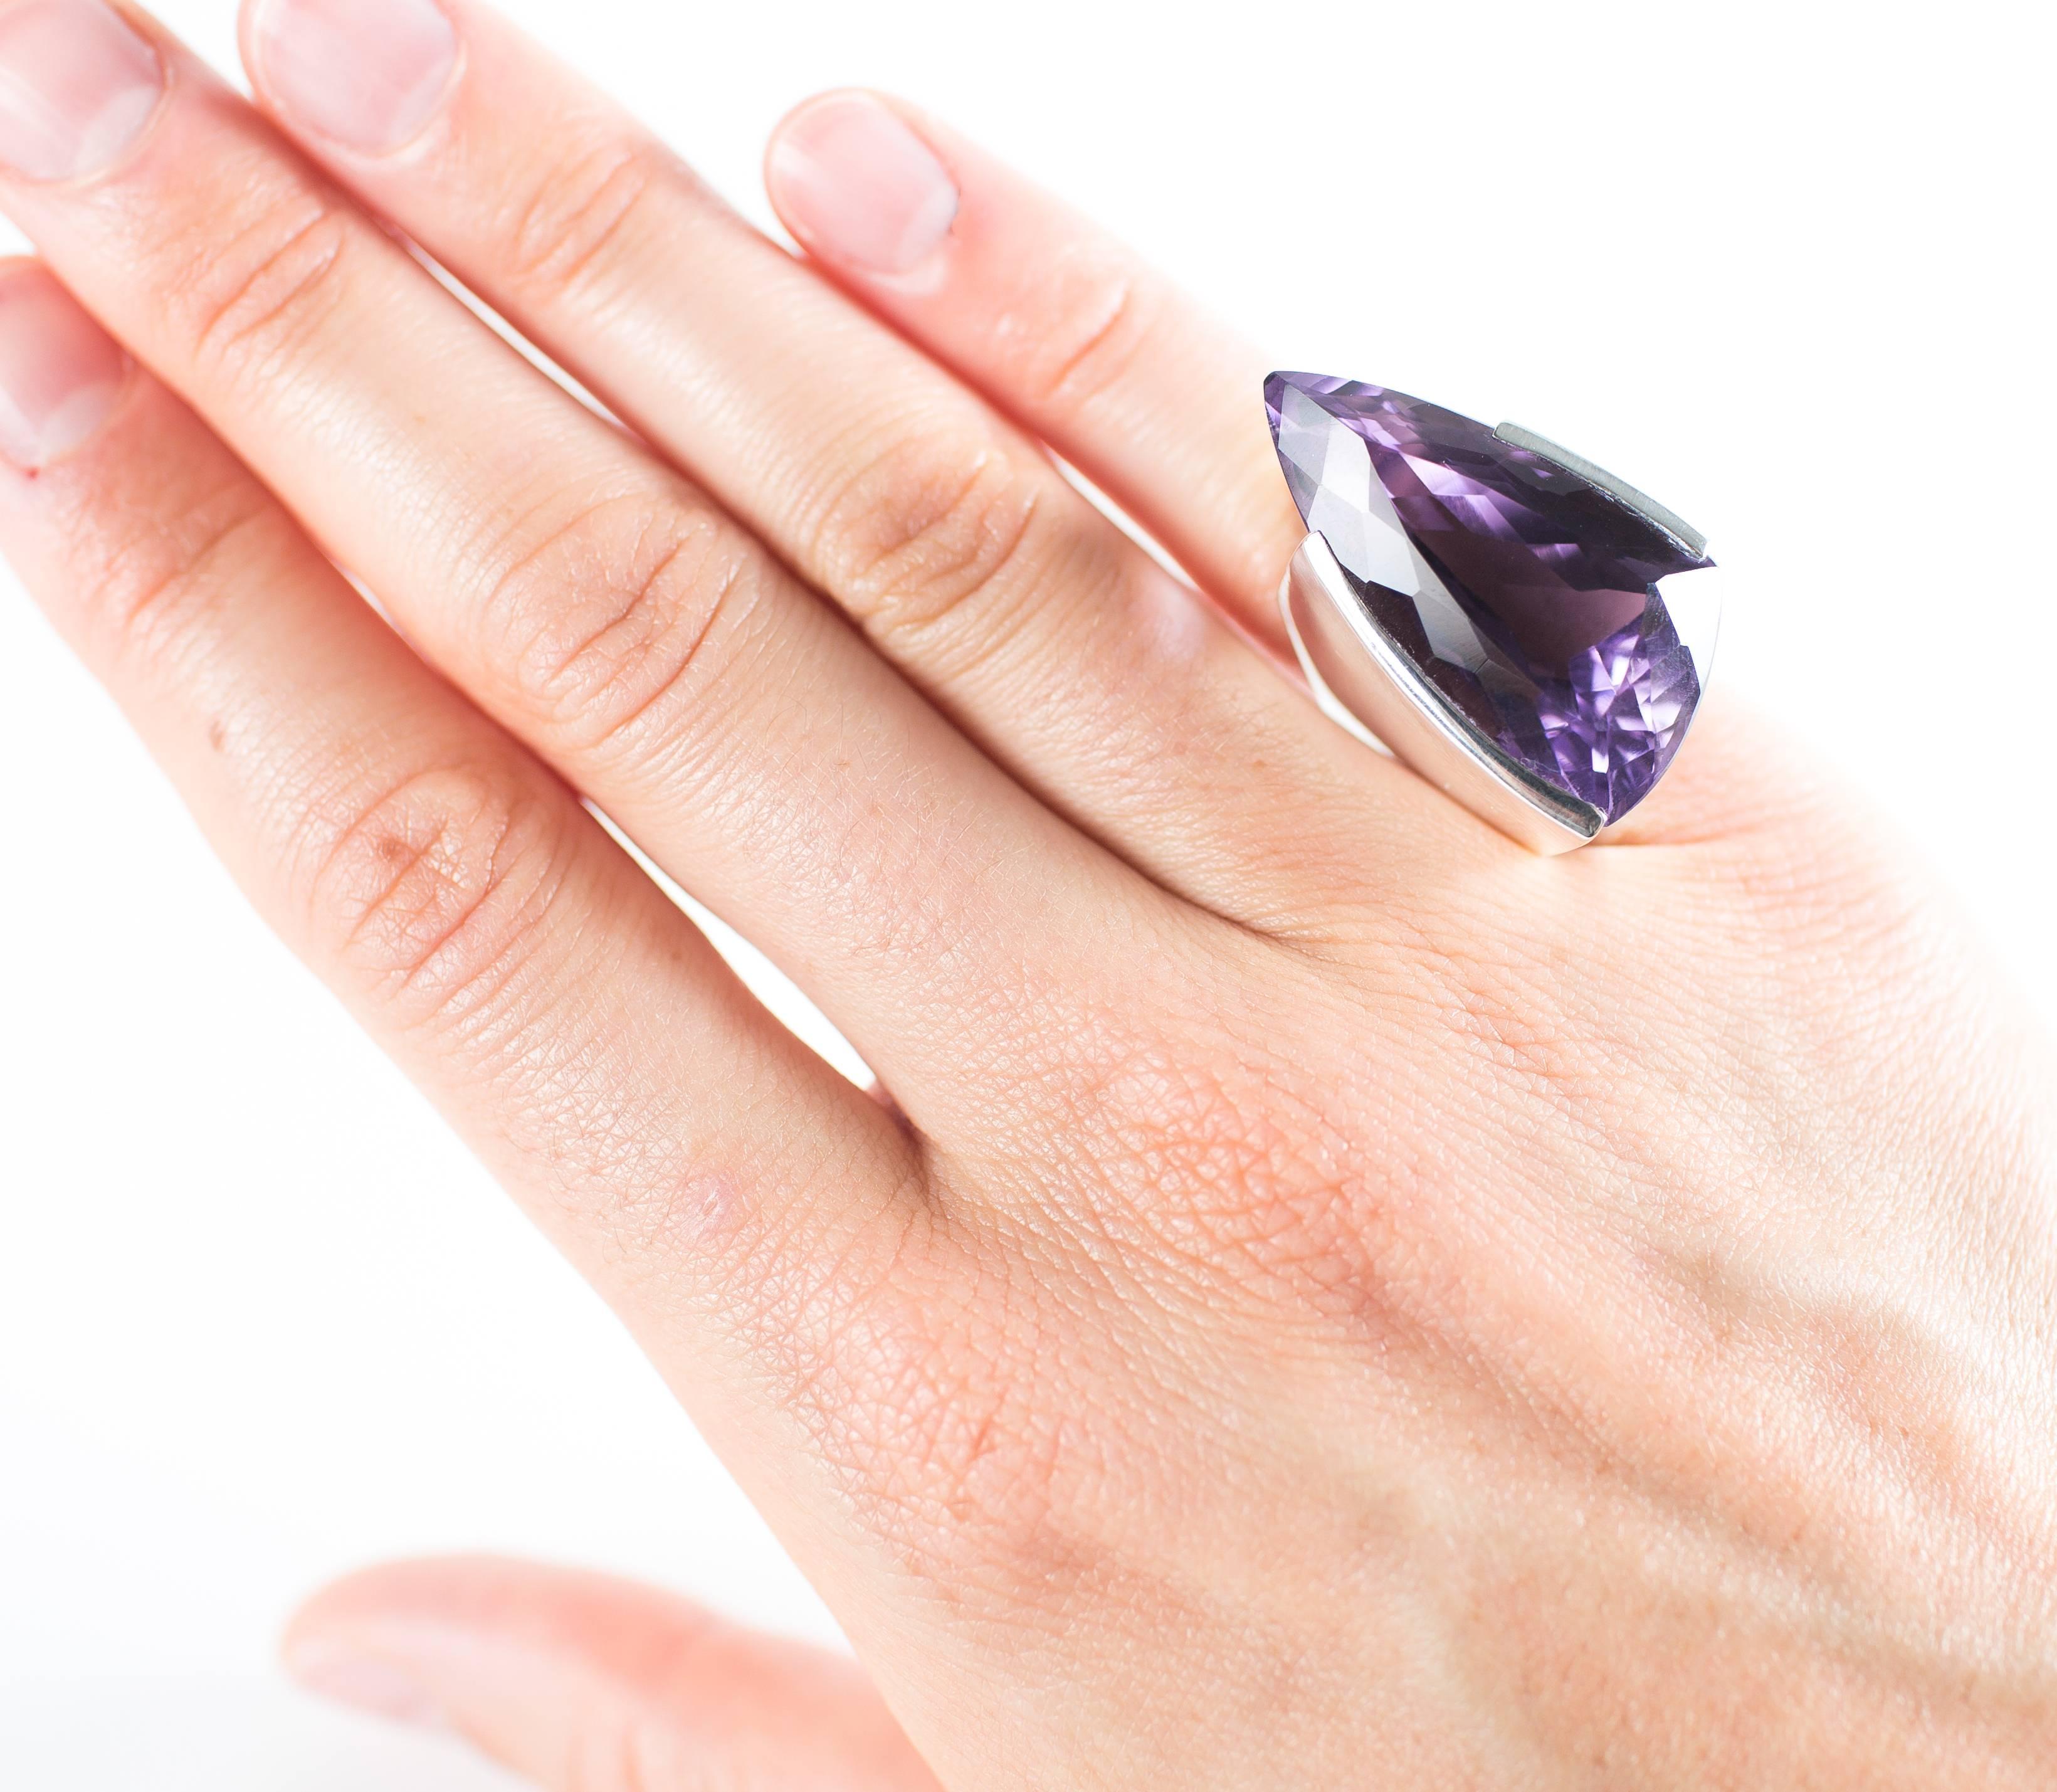 Fabulous Brazilian fancy cut Amethyst set in Sterling Silver by Rio de Janeiro designer Hans Stahr.  This beautiful Amethyst sparkles with flashes of pink and purple.  Han's unique design supports the Amethyst while giving it lots of light.  One of